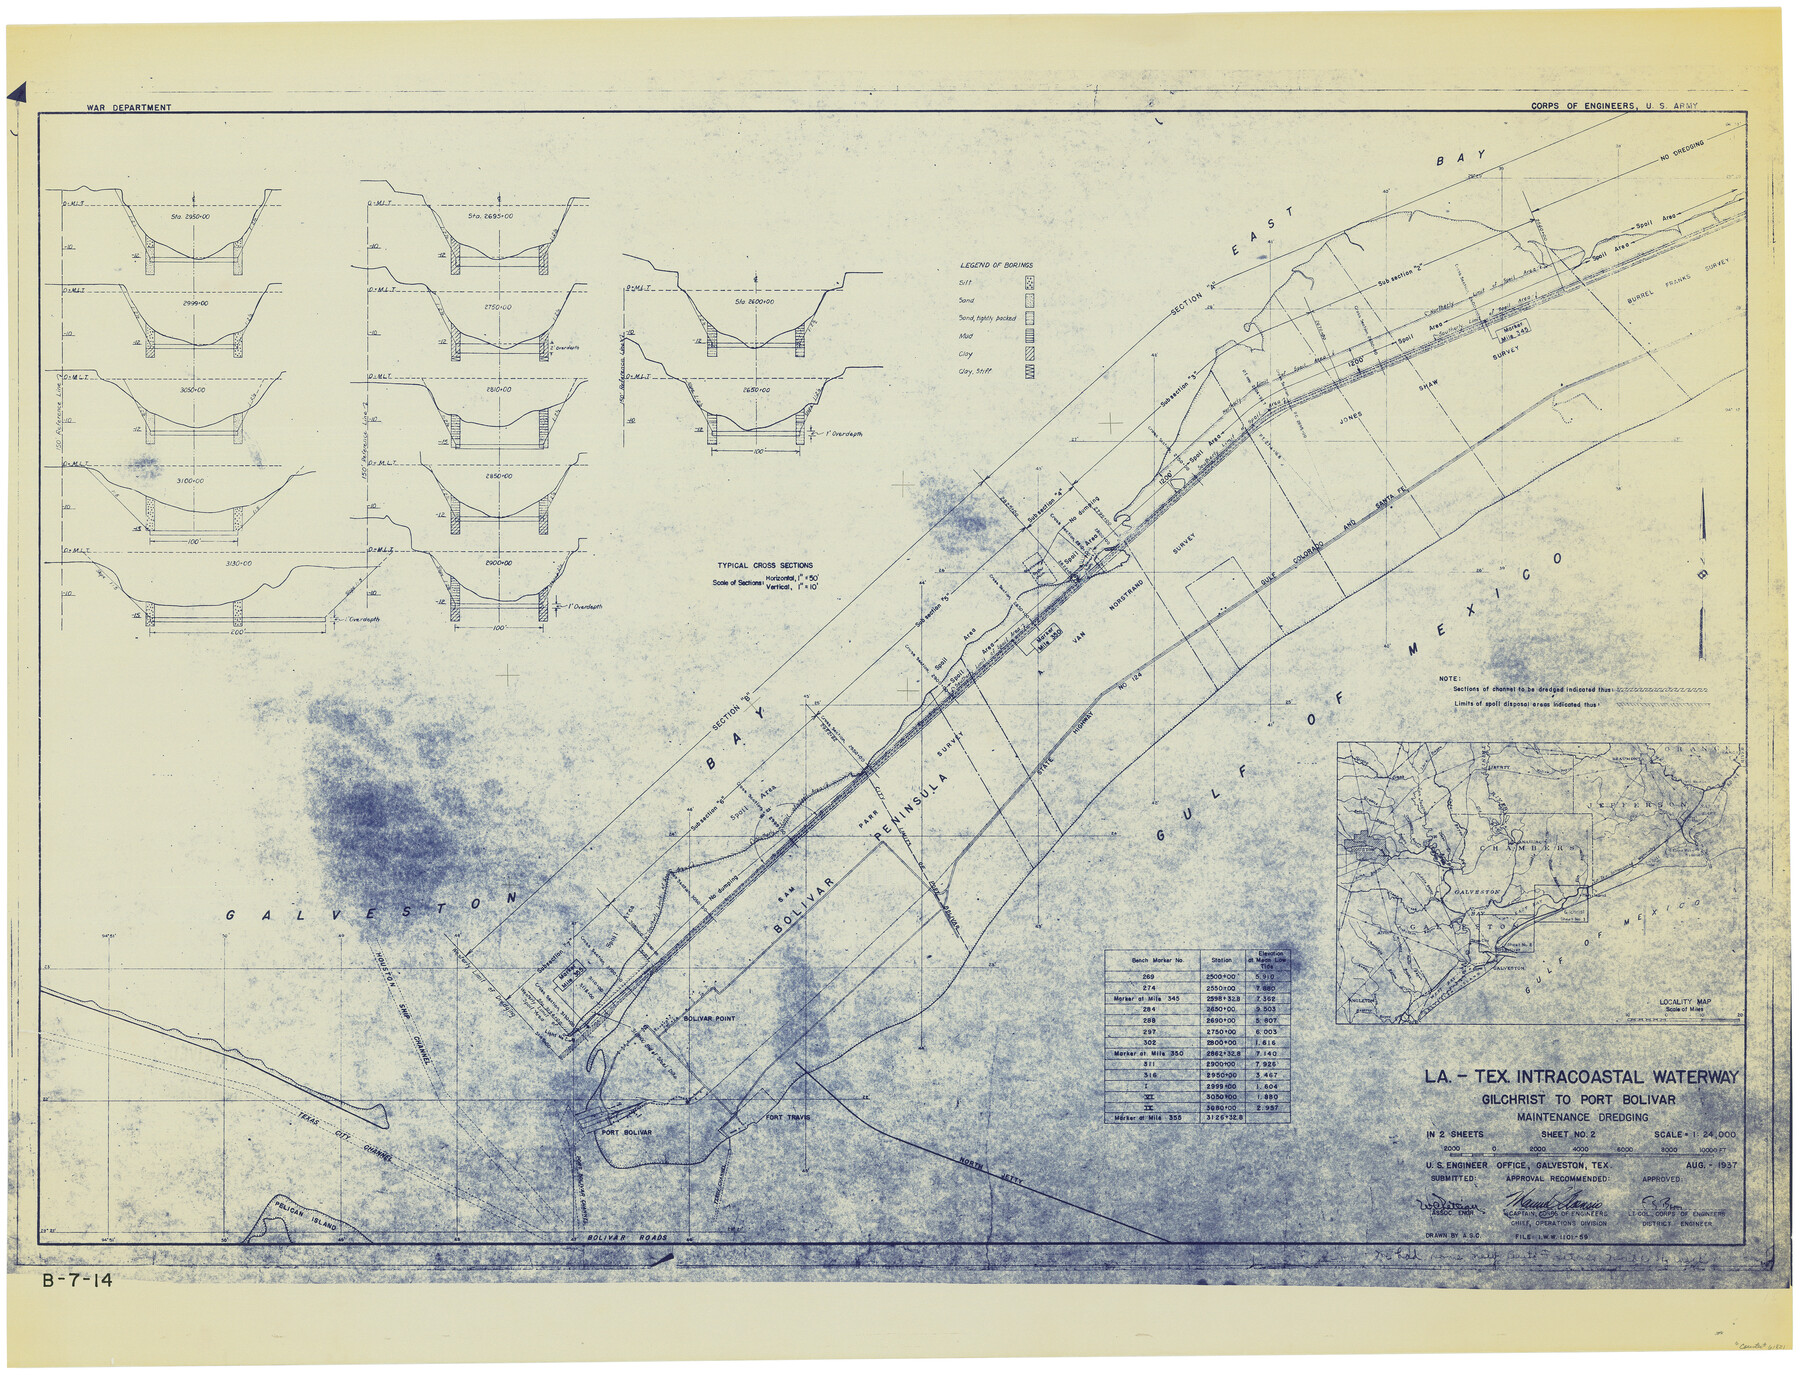 61821, Louisiana and Texas Intracoastal Waterway - Gilchrist to Port Bolivar, Maintenance Dredging - Sheet 2, General Map Collection